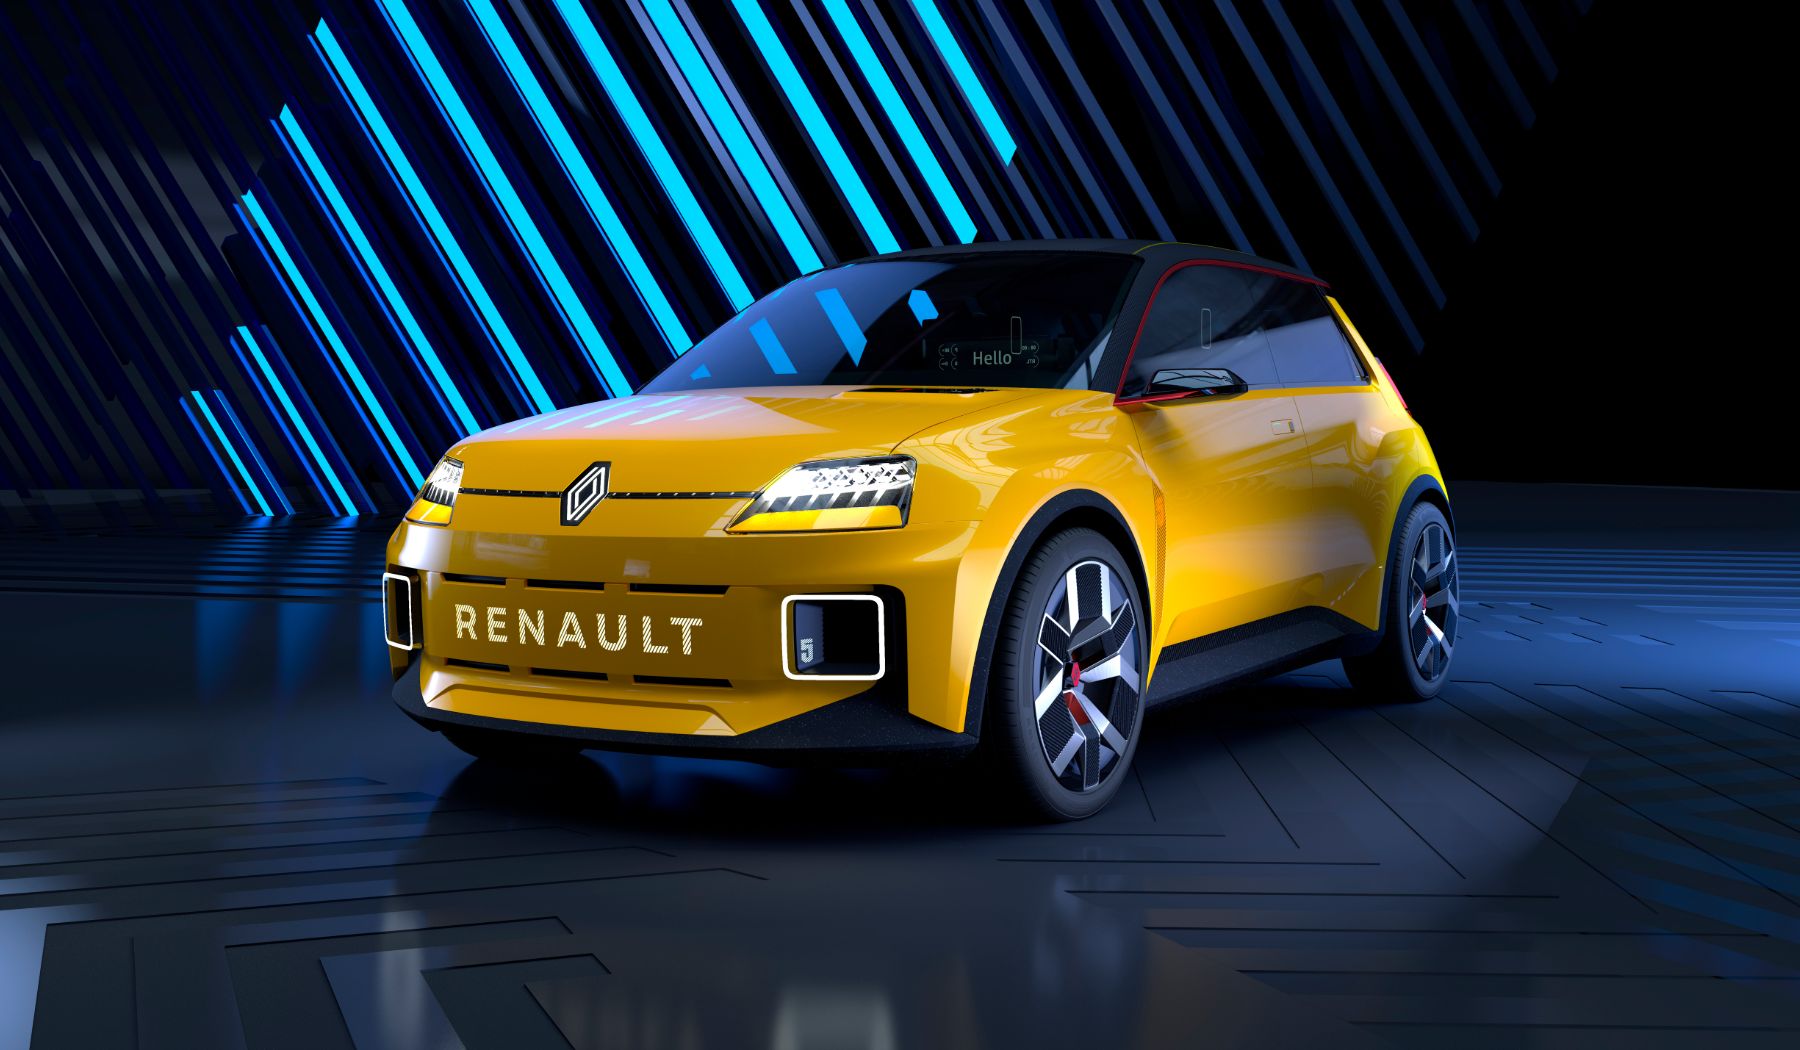 It's Alive! Renault 5 EV Concept Has Blinking Headlights Inspired by a  Cartoon - autoevolution